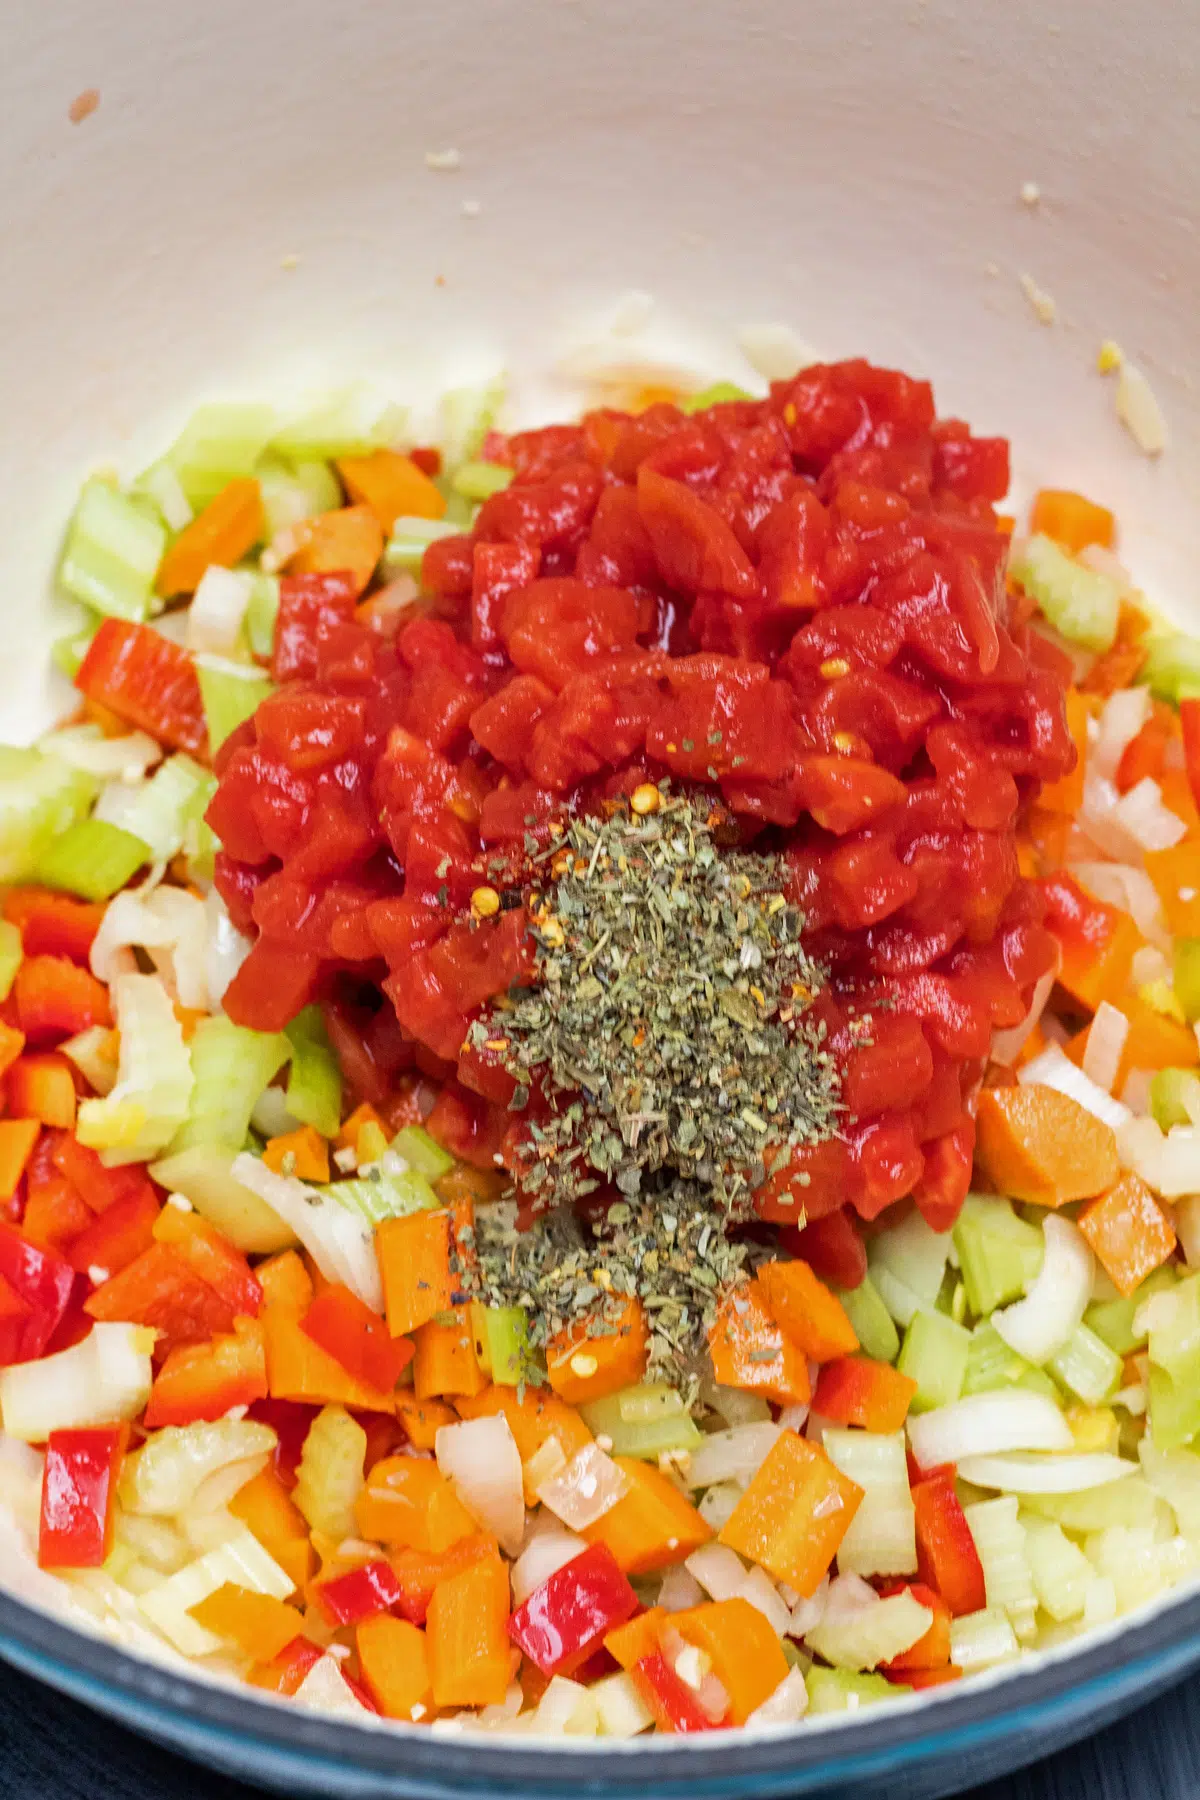 Process photo 2 add diced carrots, celery, red peppers, canned diced tomatoes, and seasoning.